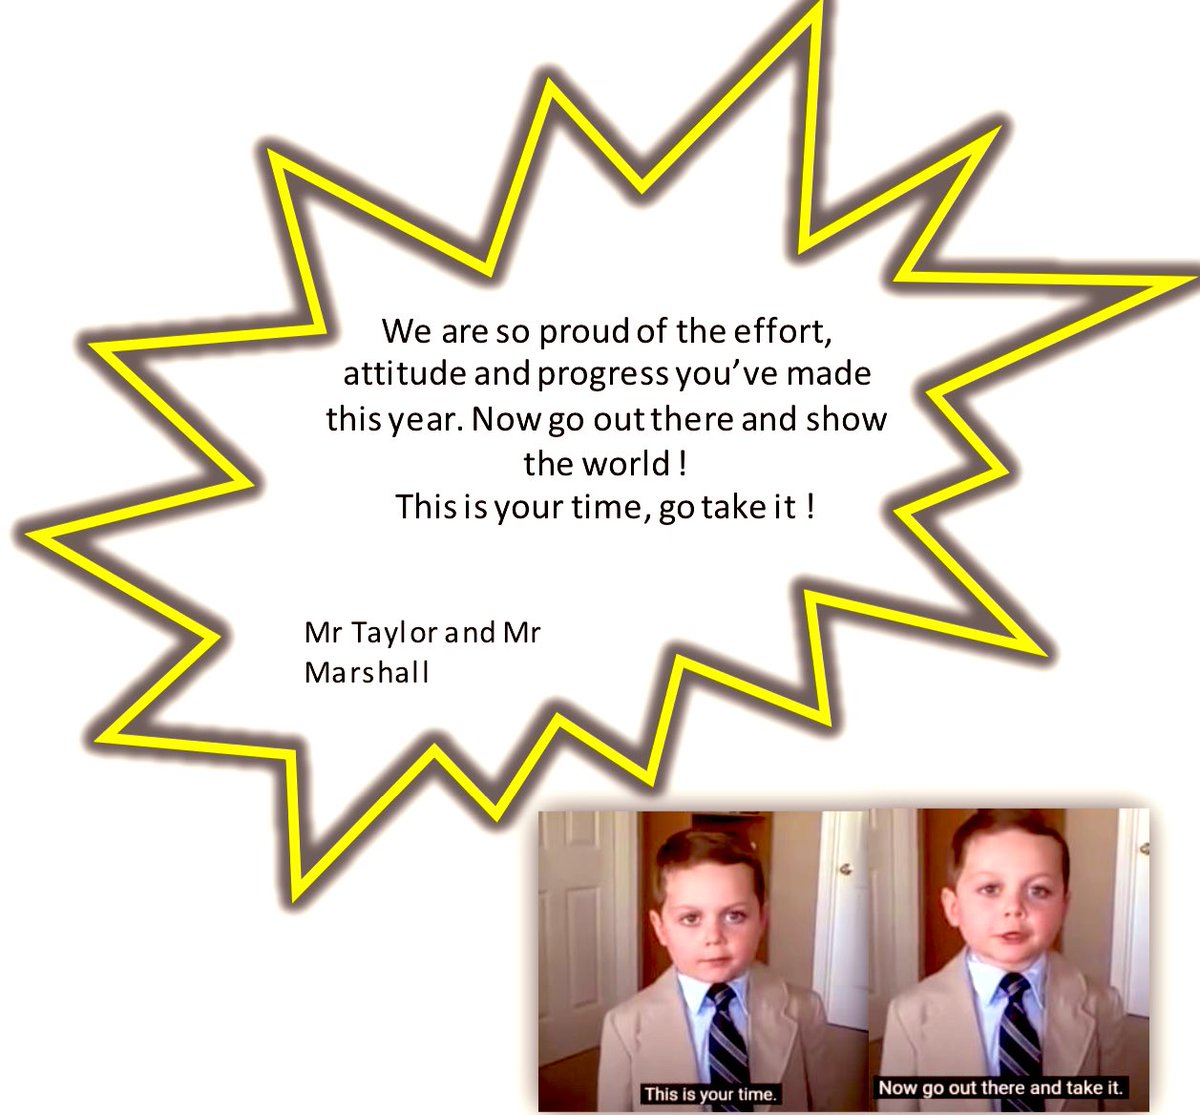 Massive praise for our incredible Year 6 pupils for kicking off their SATs with such positivity and determination! Mr. Taylor and Mr. Marshall couldn’t be prouder of your hard work. Keep shining bright all week superstars! 💪 #SATs #Year6 #YouGotThis #ThisIsYourTime #Godiswithyou